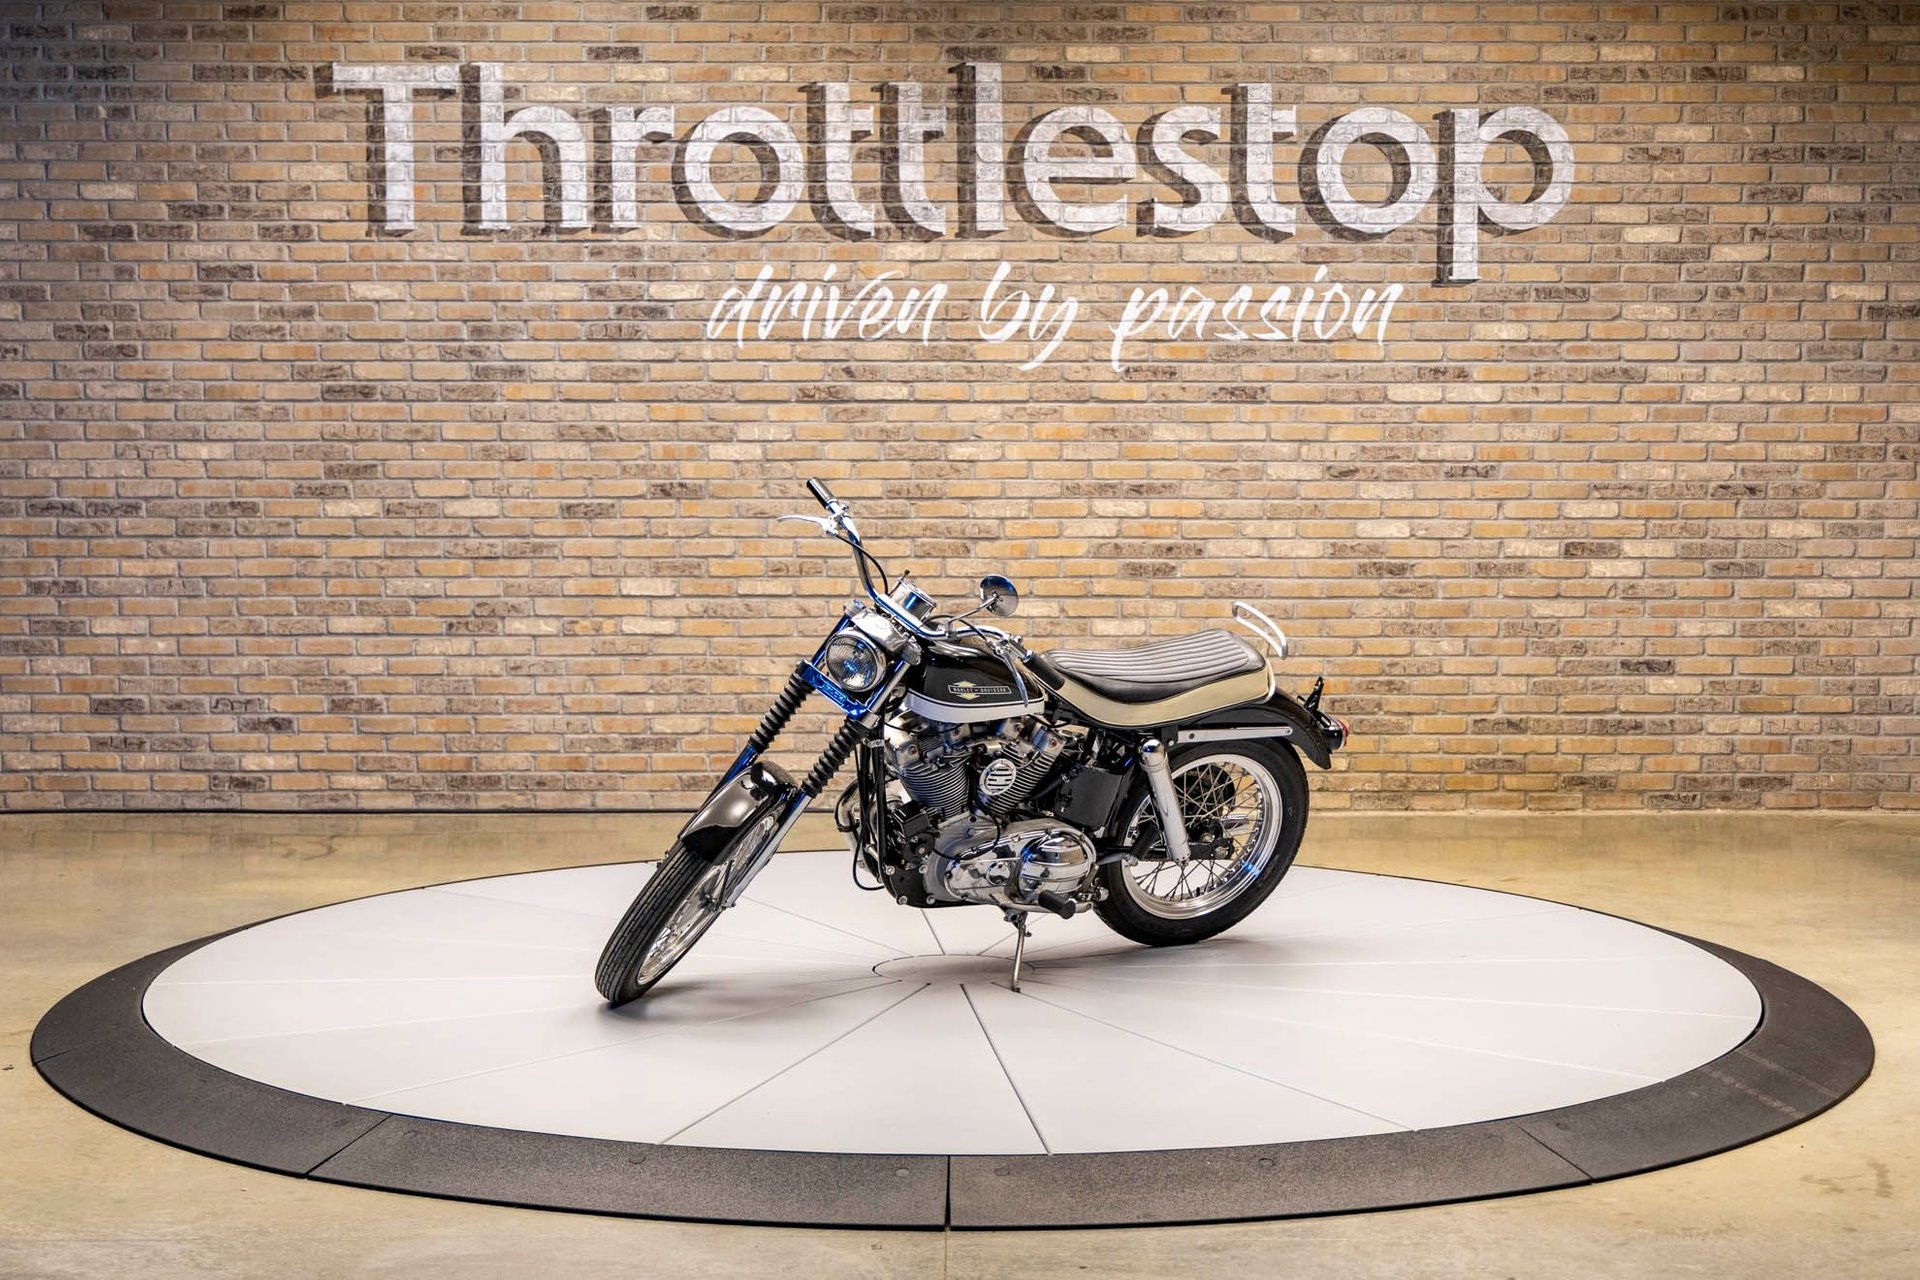 813458 | 1963 Harley-Davidson XLCH Sportster | Throttlestop | Automotive and Motorcycle Consignment Dealer